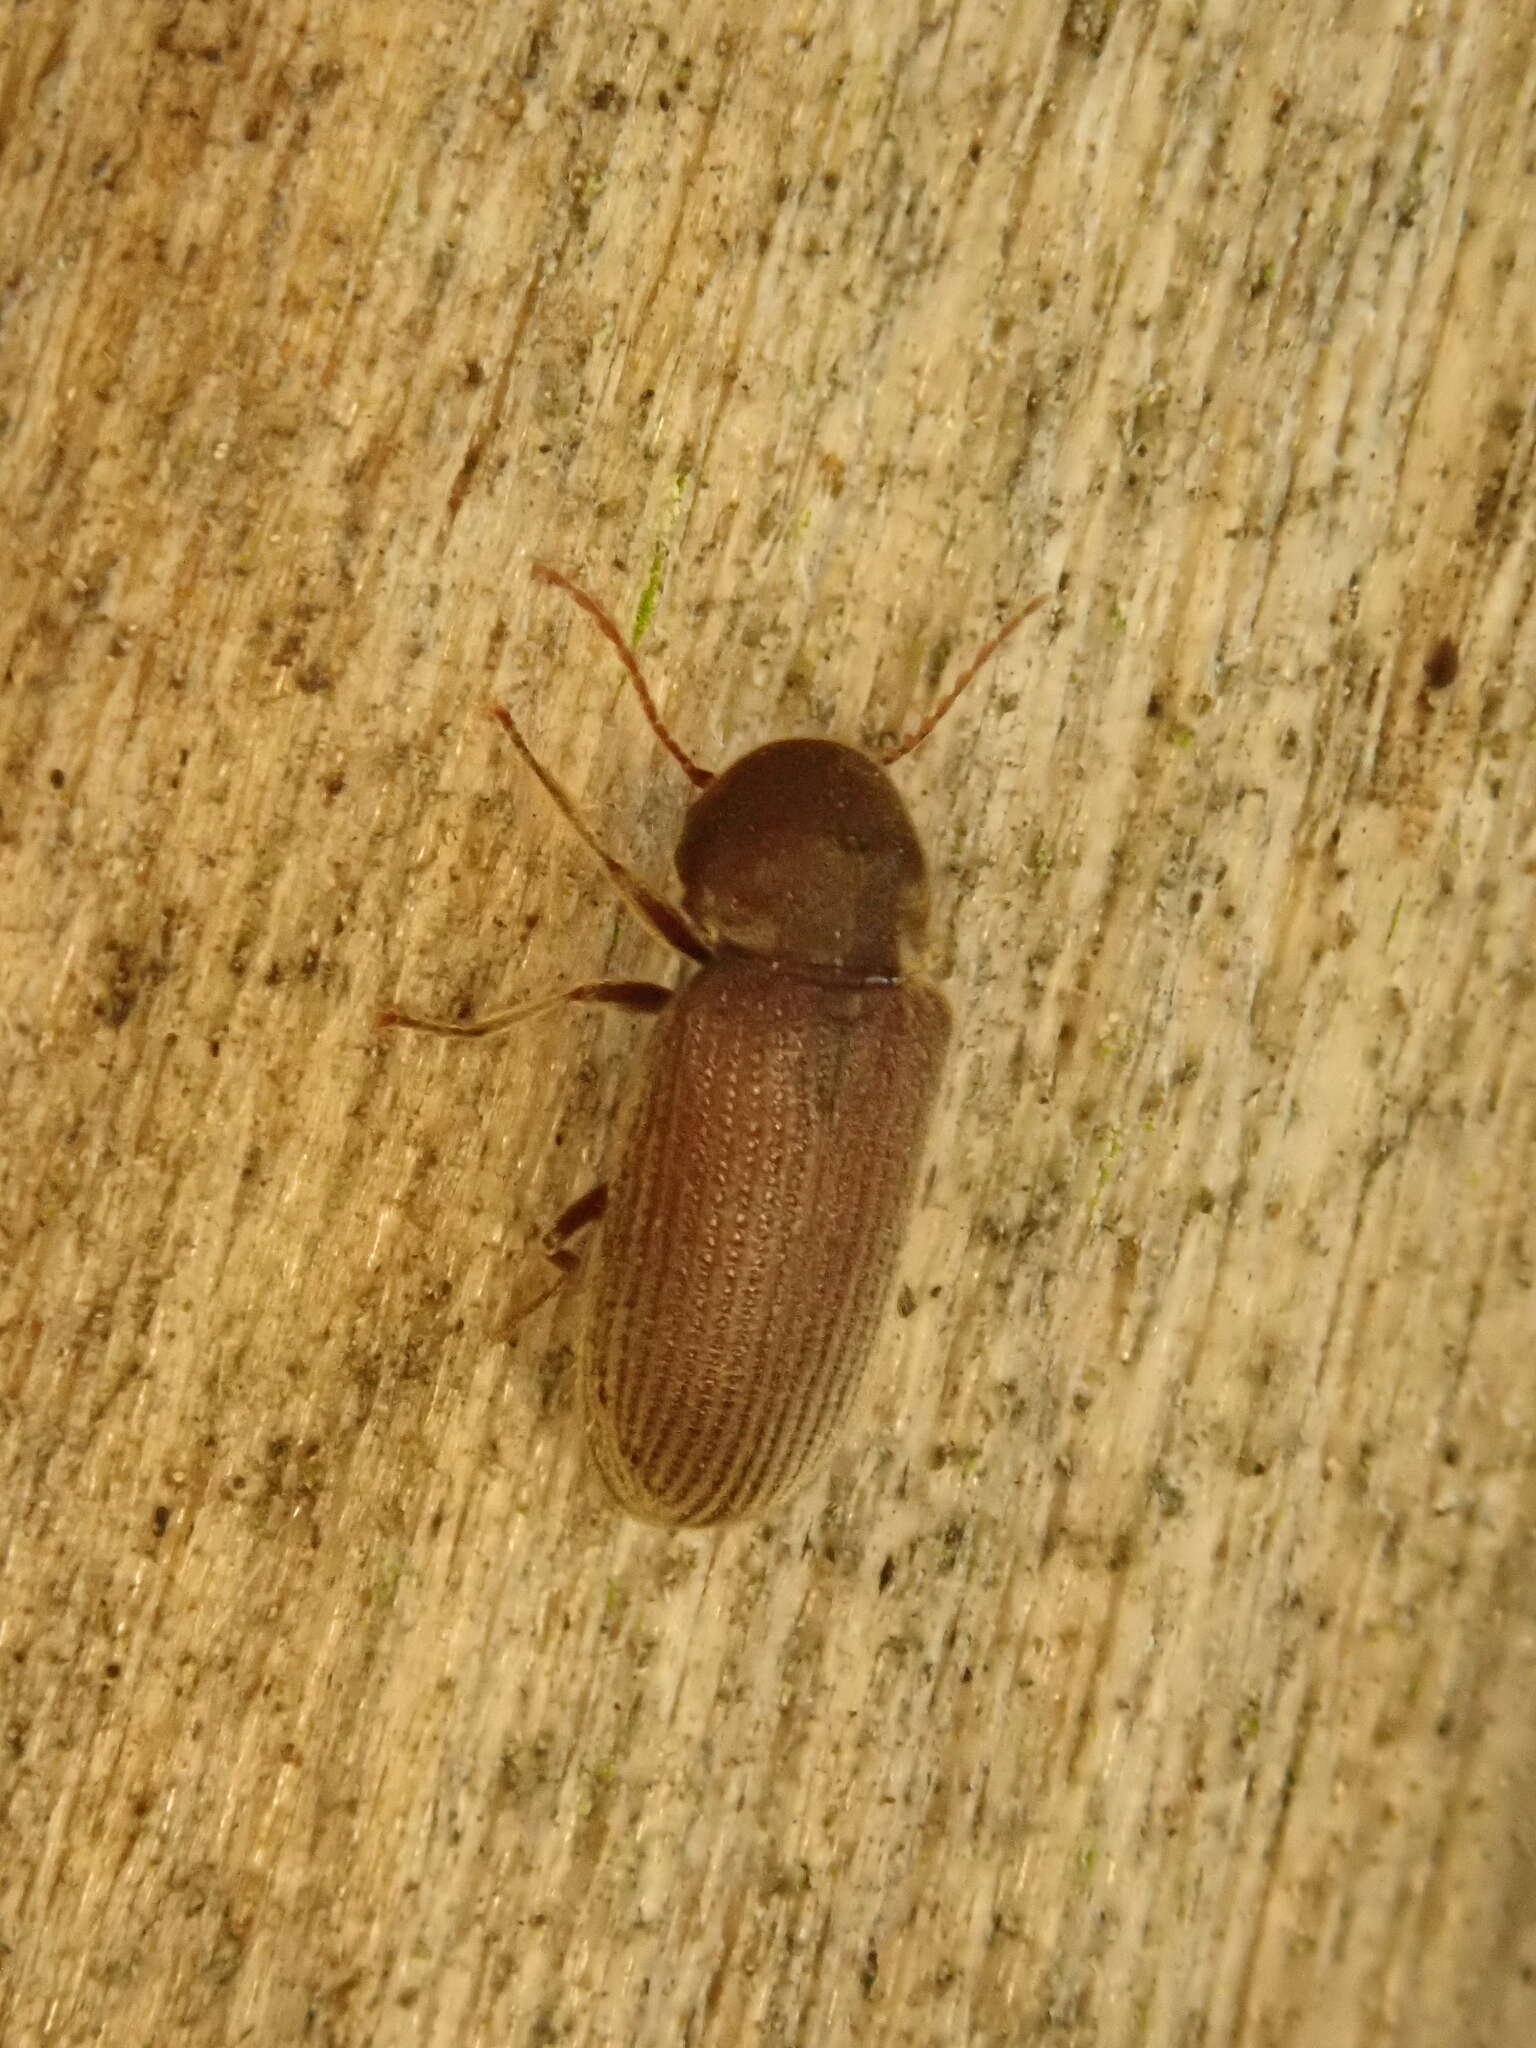 Image of Anobiid beetle